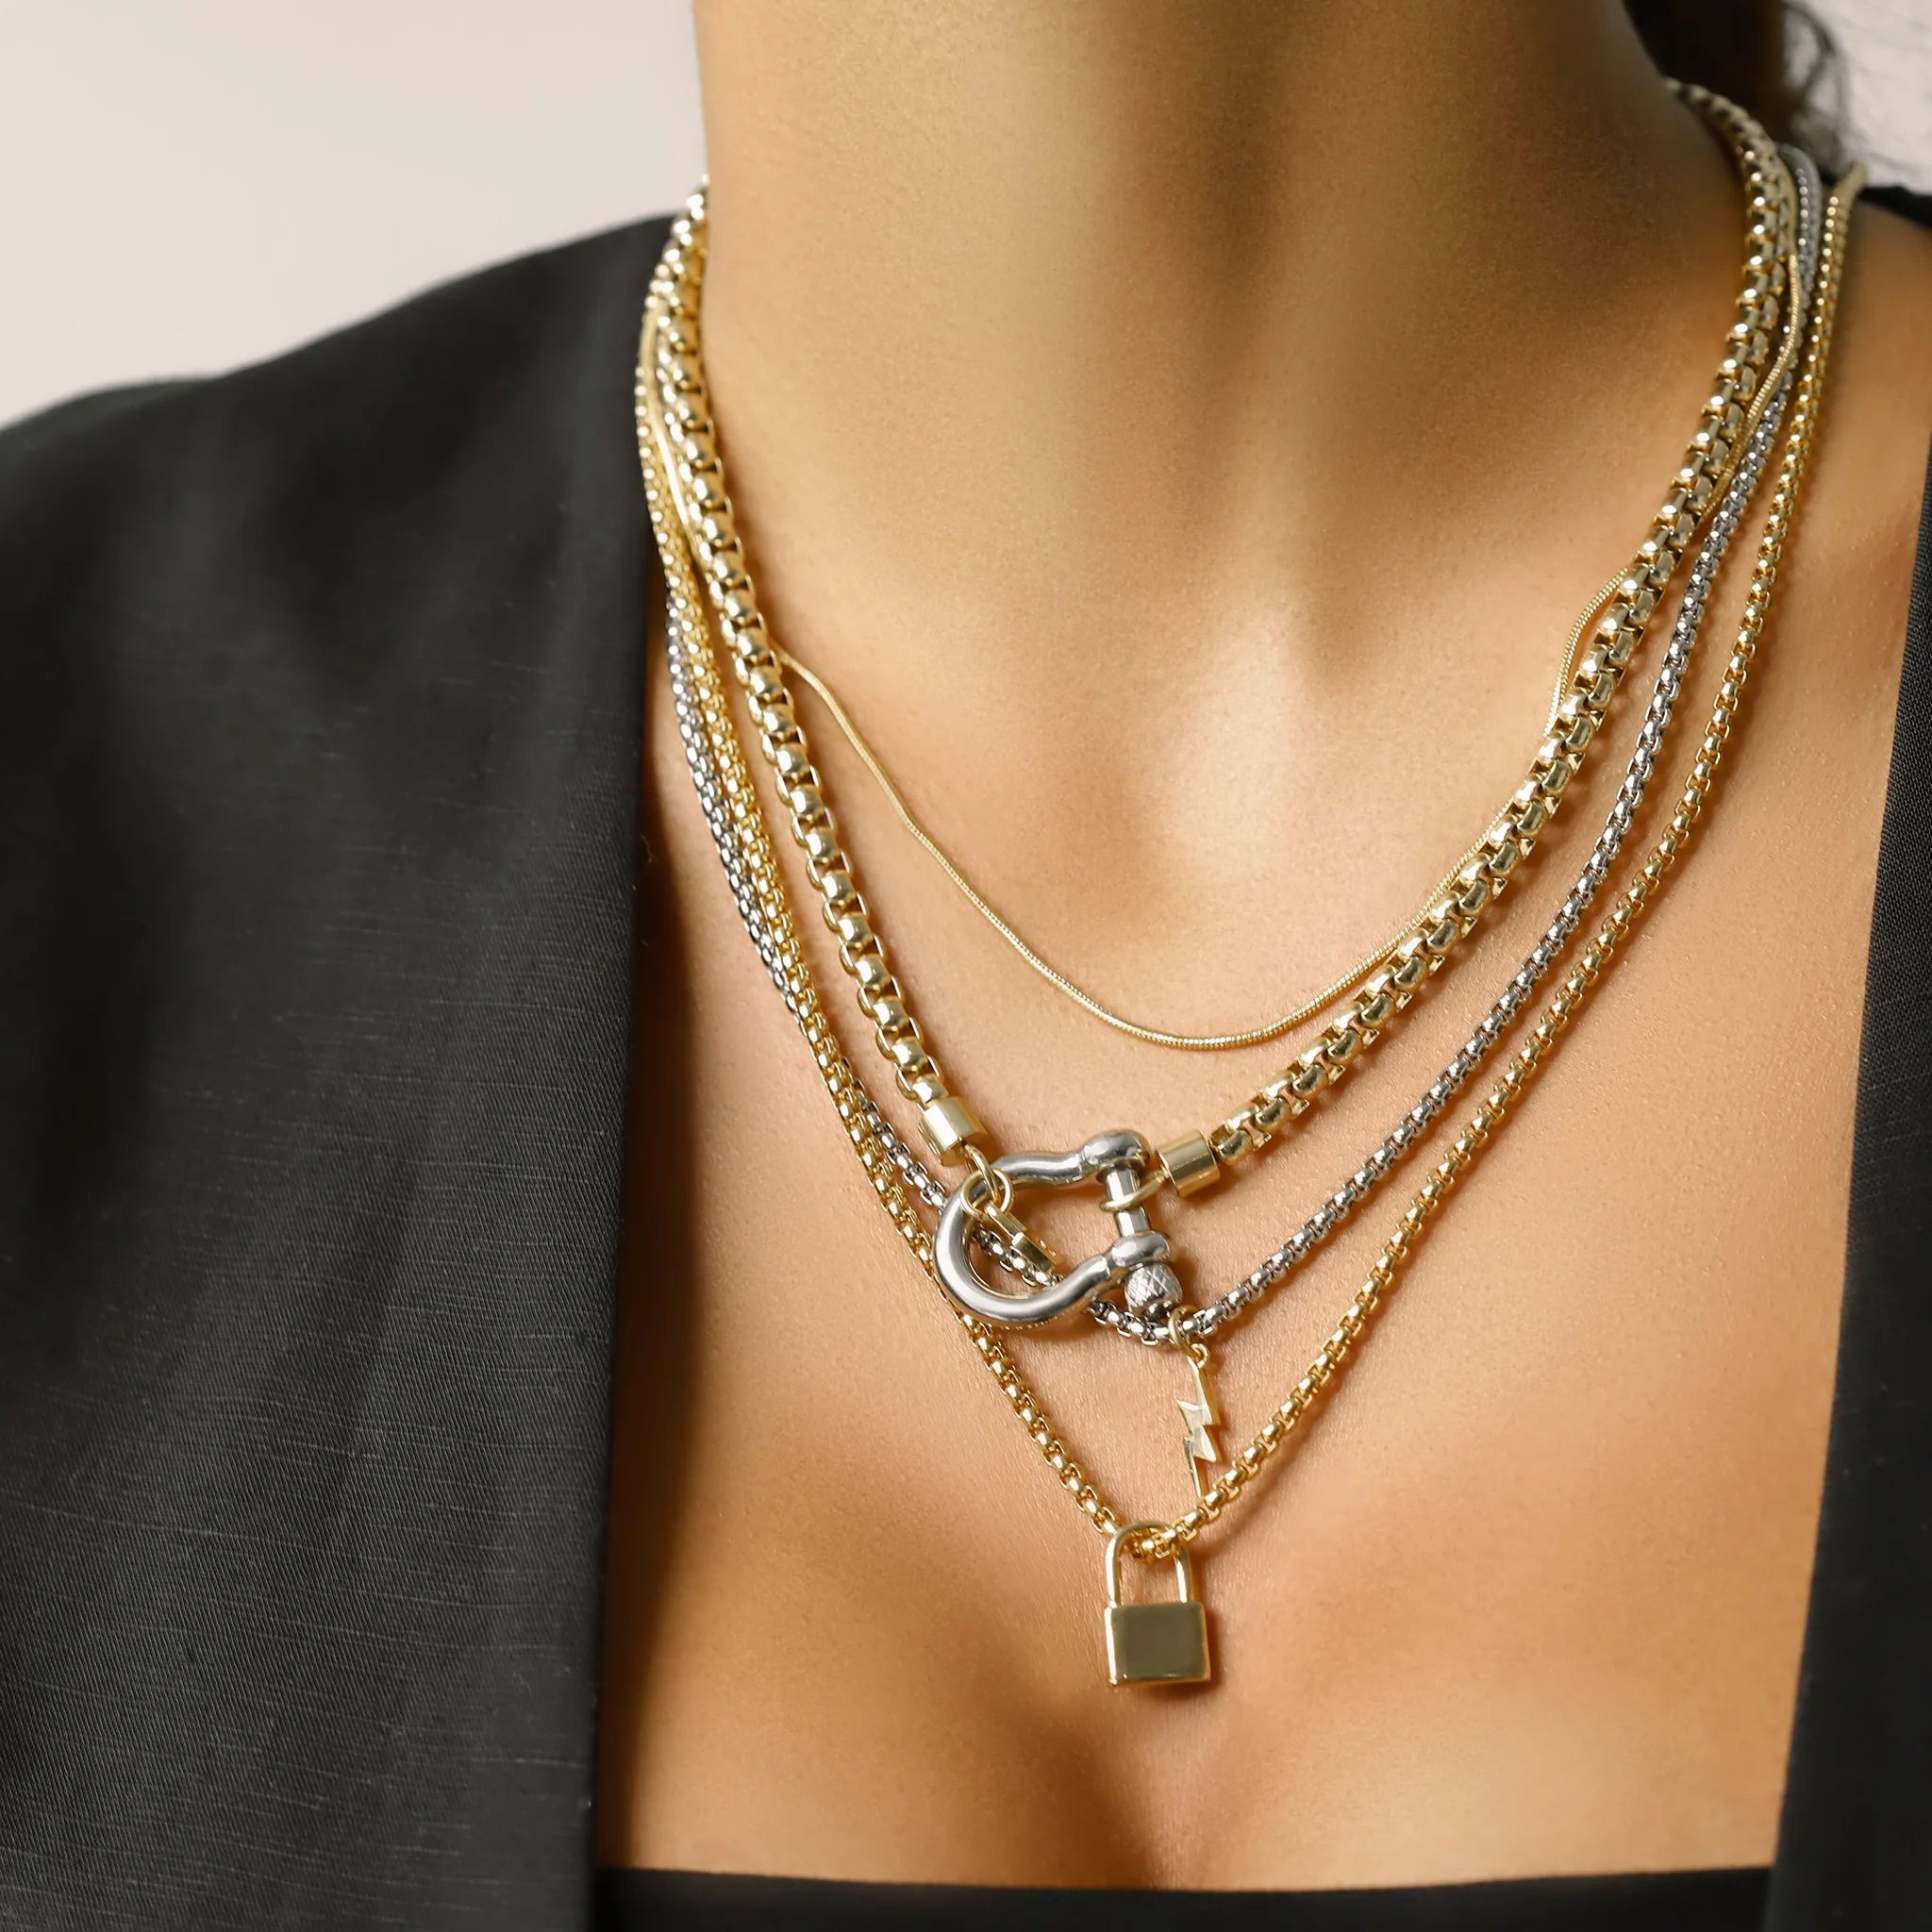 Layered Lock & Key Necklace, Gold Plated Chain Pendant